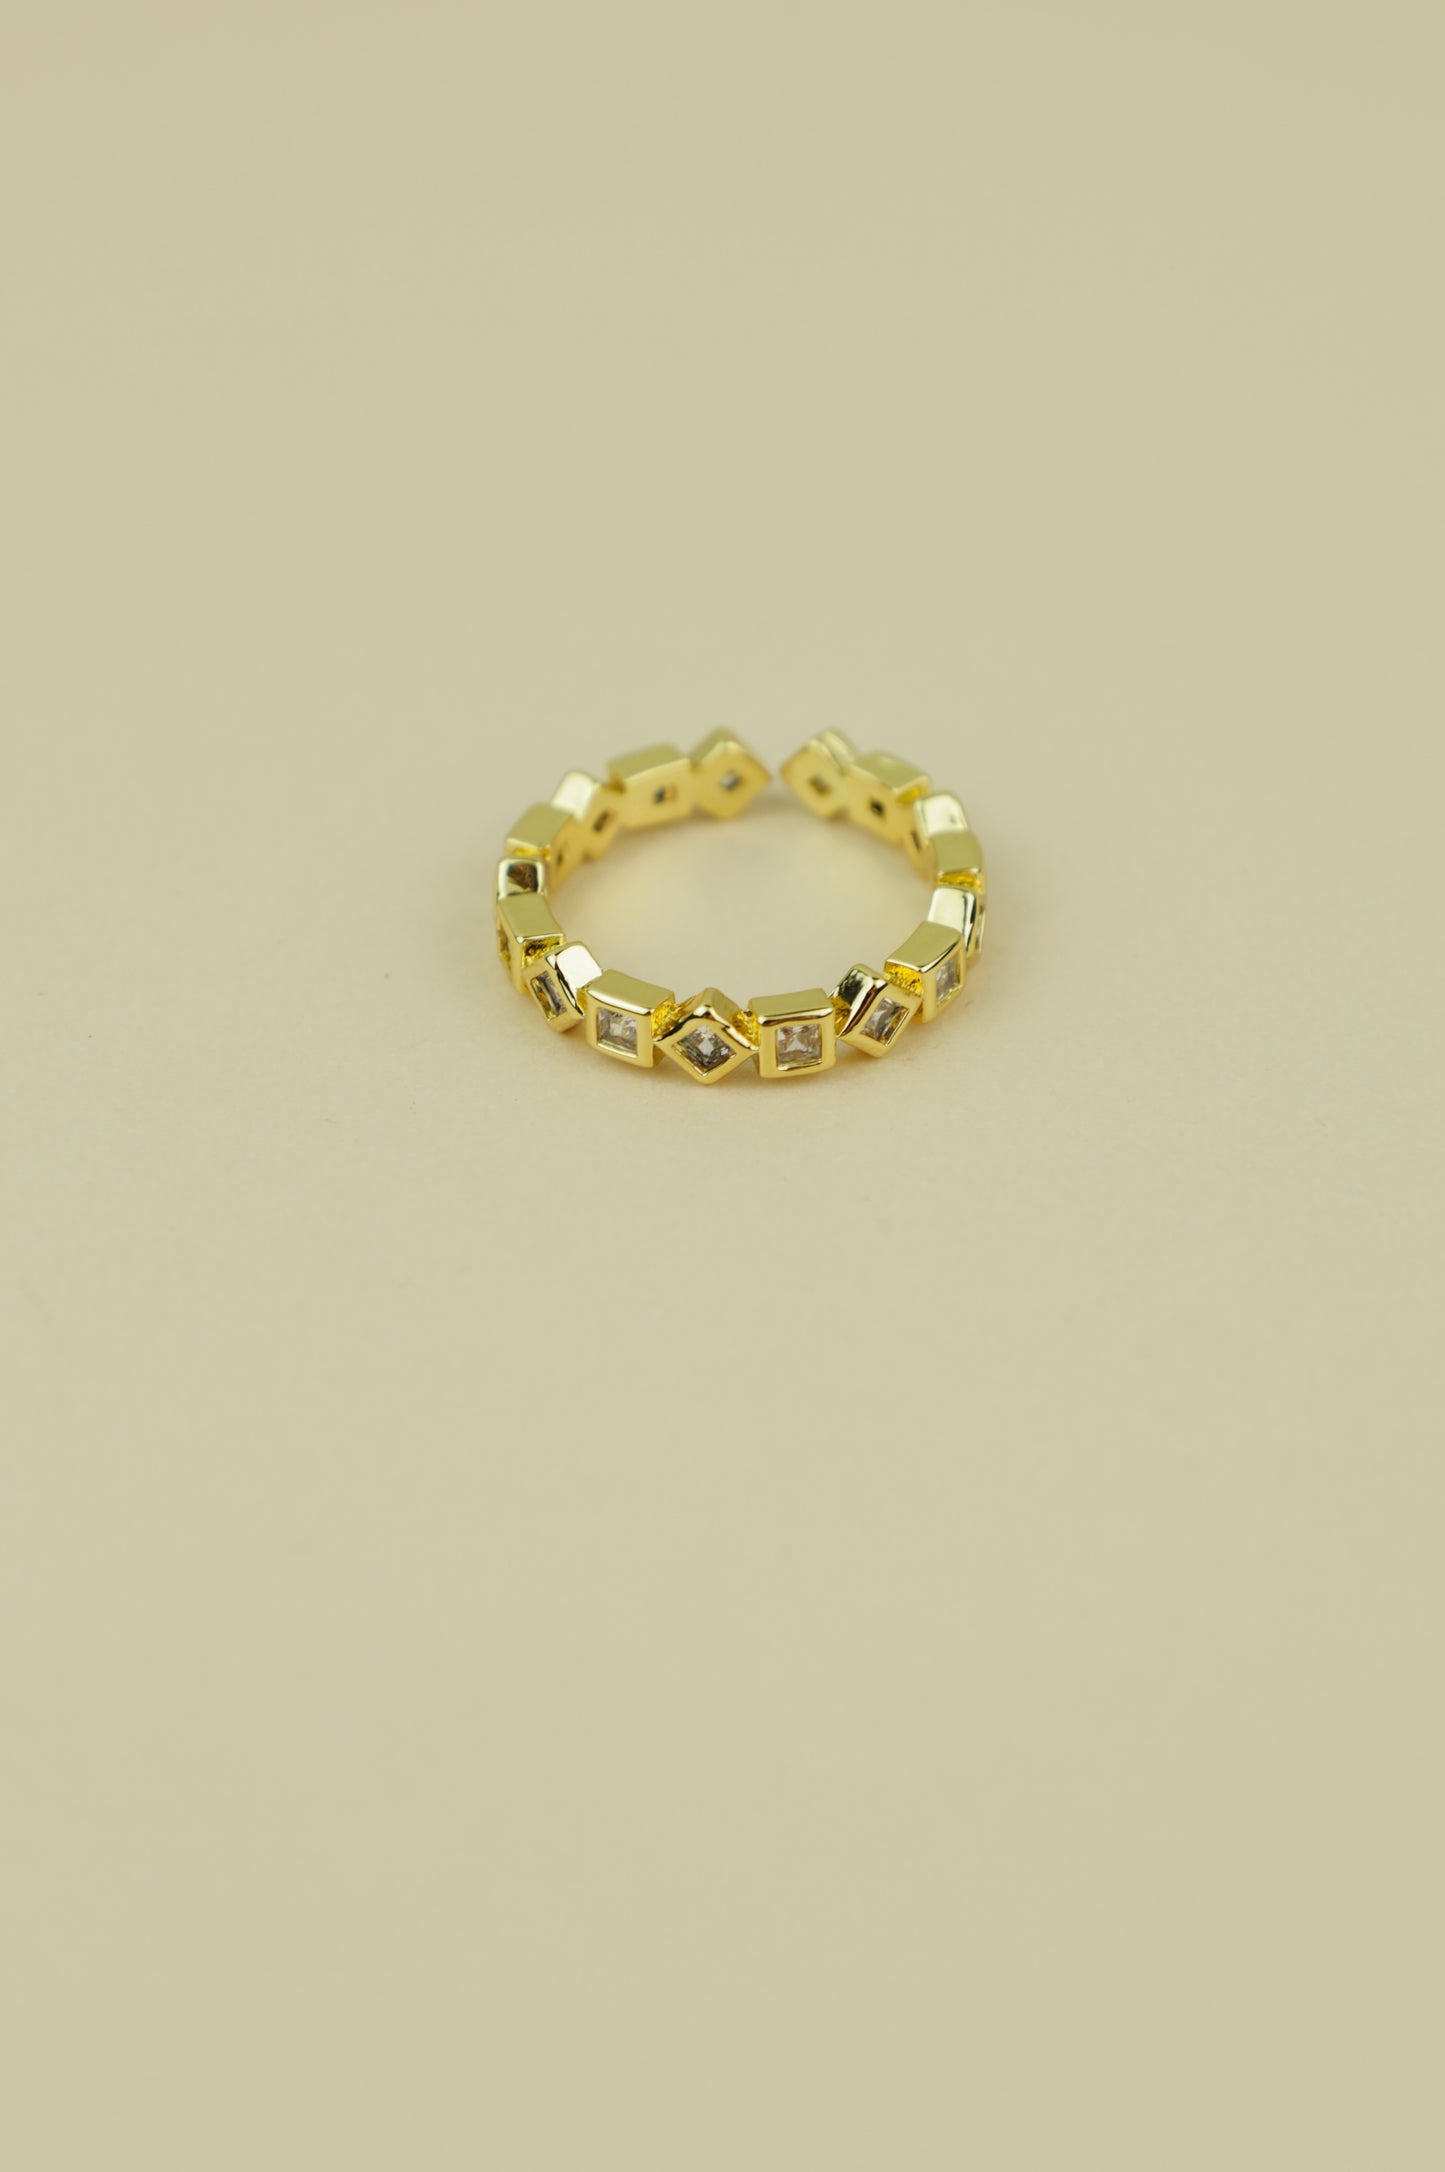 Balance ring in Gold